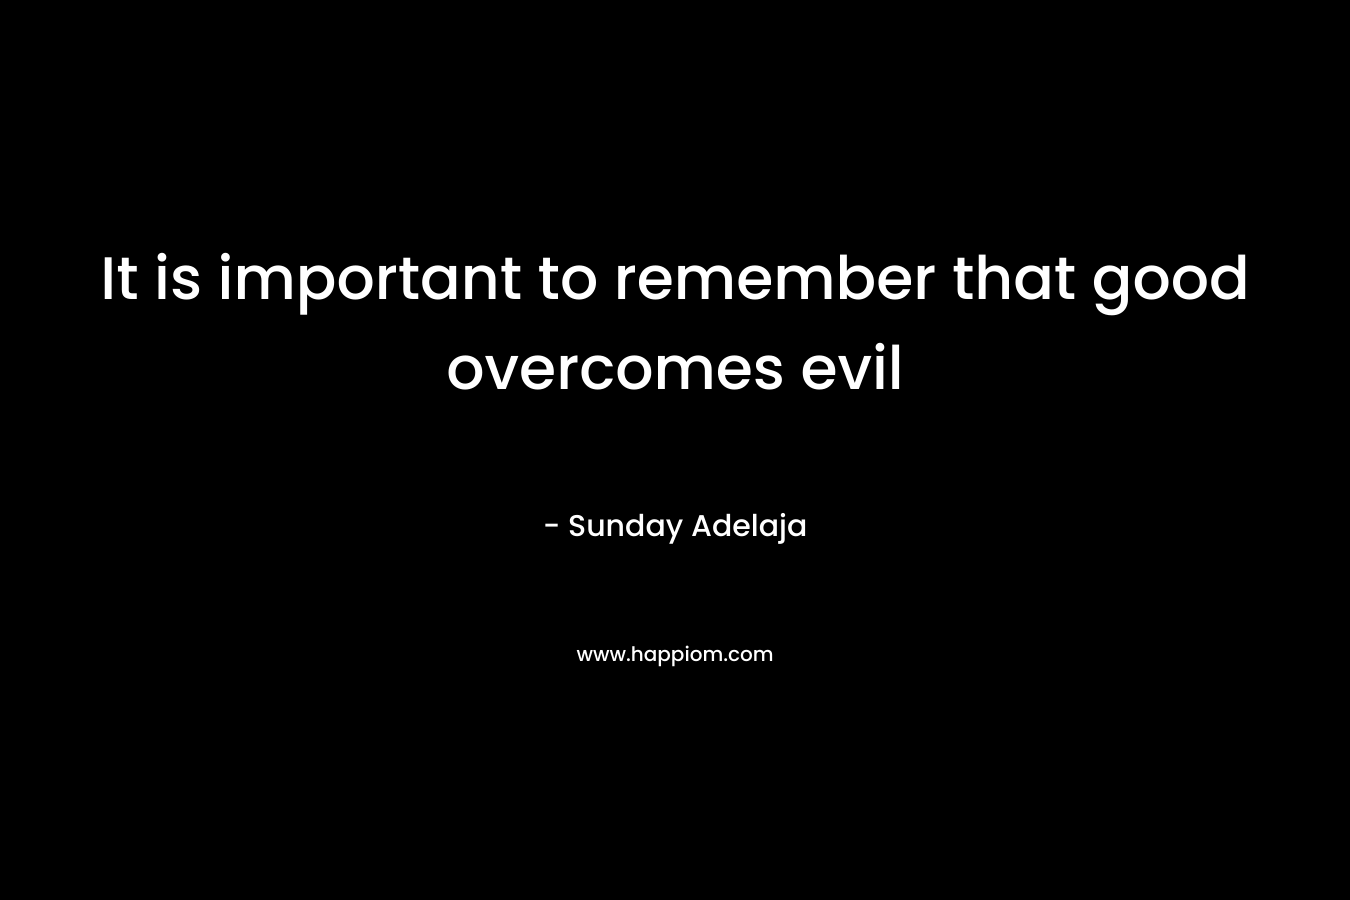 It is important to remember that good overcomes evil